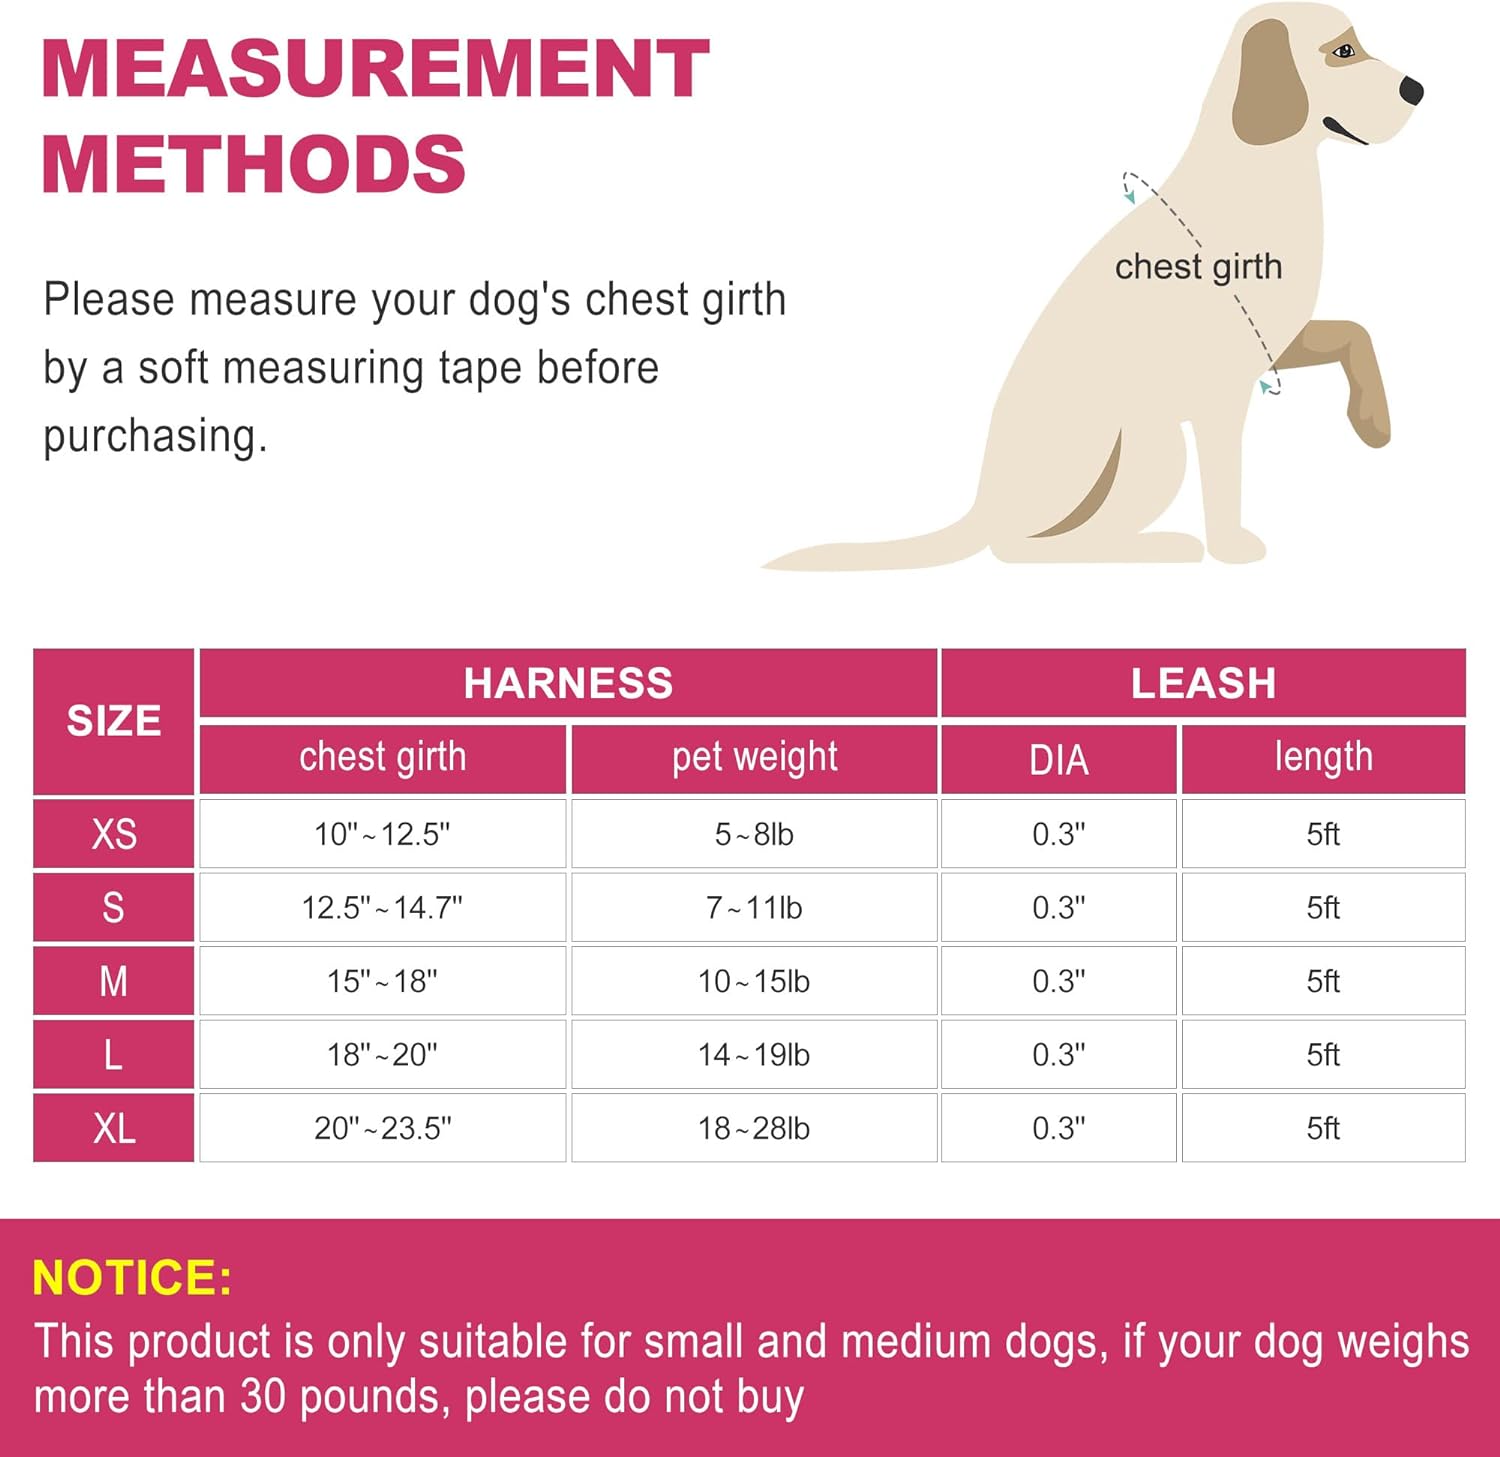 haapaw Dog Harness with Leash Set, No Pull Adjustable Reflective Step-in Puppy Harness with Thickened Padded Vest for Extra-Small/Small Medium Dogs